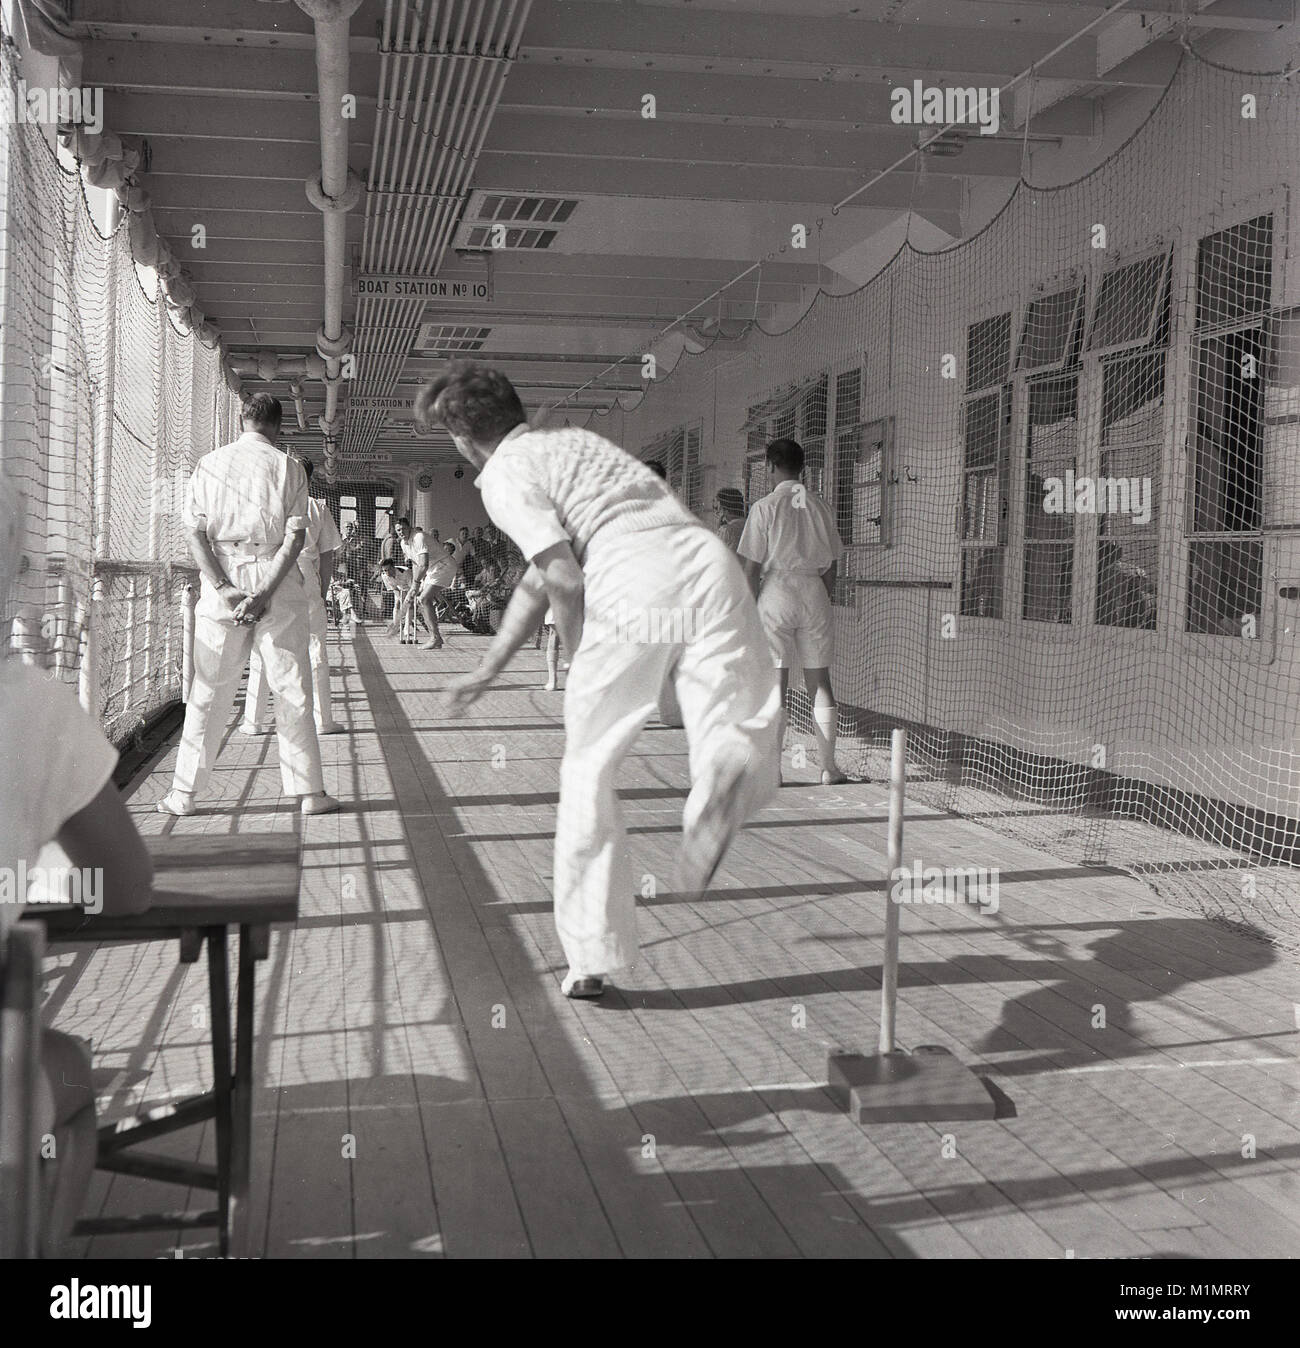 1950s, historical, male passengers and crew playing a game of deck cricket. They are travelling on a Union-castle steamship, carrying mail, cargo and people on a sea voyage to the Cape in South Africa, which for many it will be their permanent home, as they start a new life away from the gloom of post-war Britain. Stock Photo